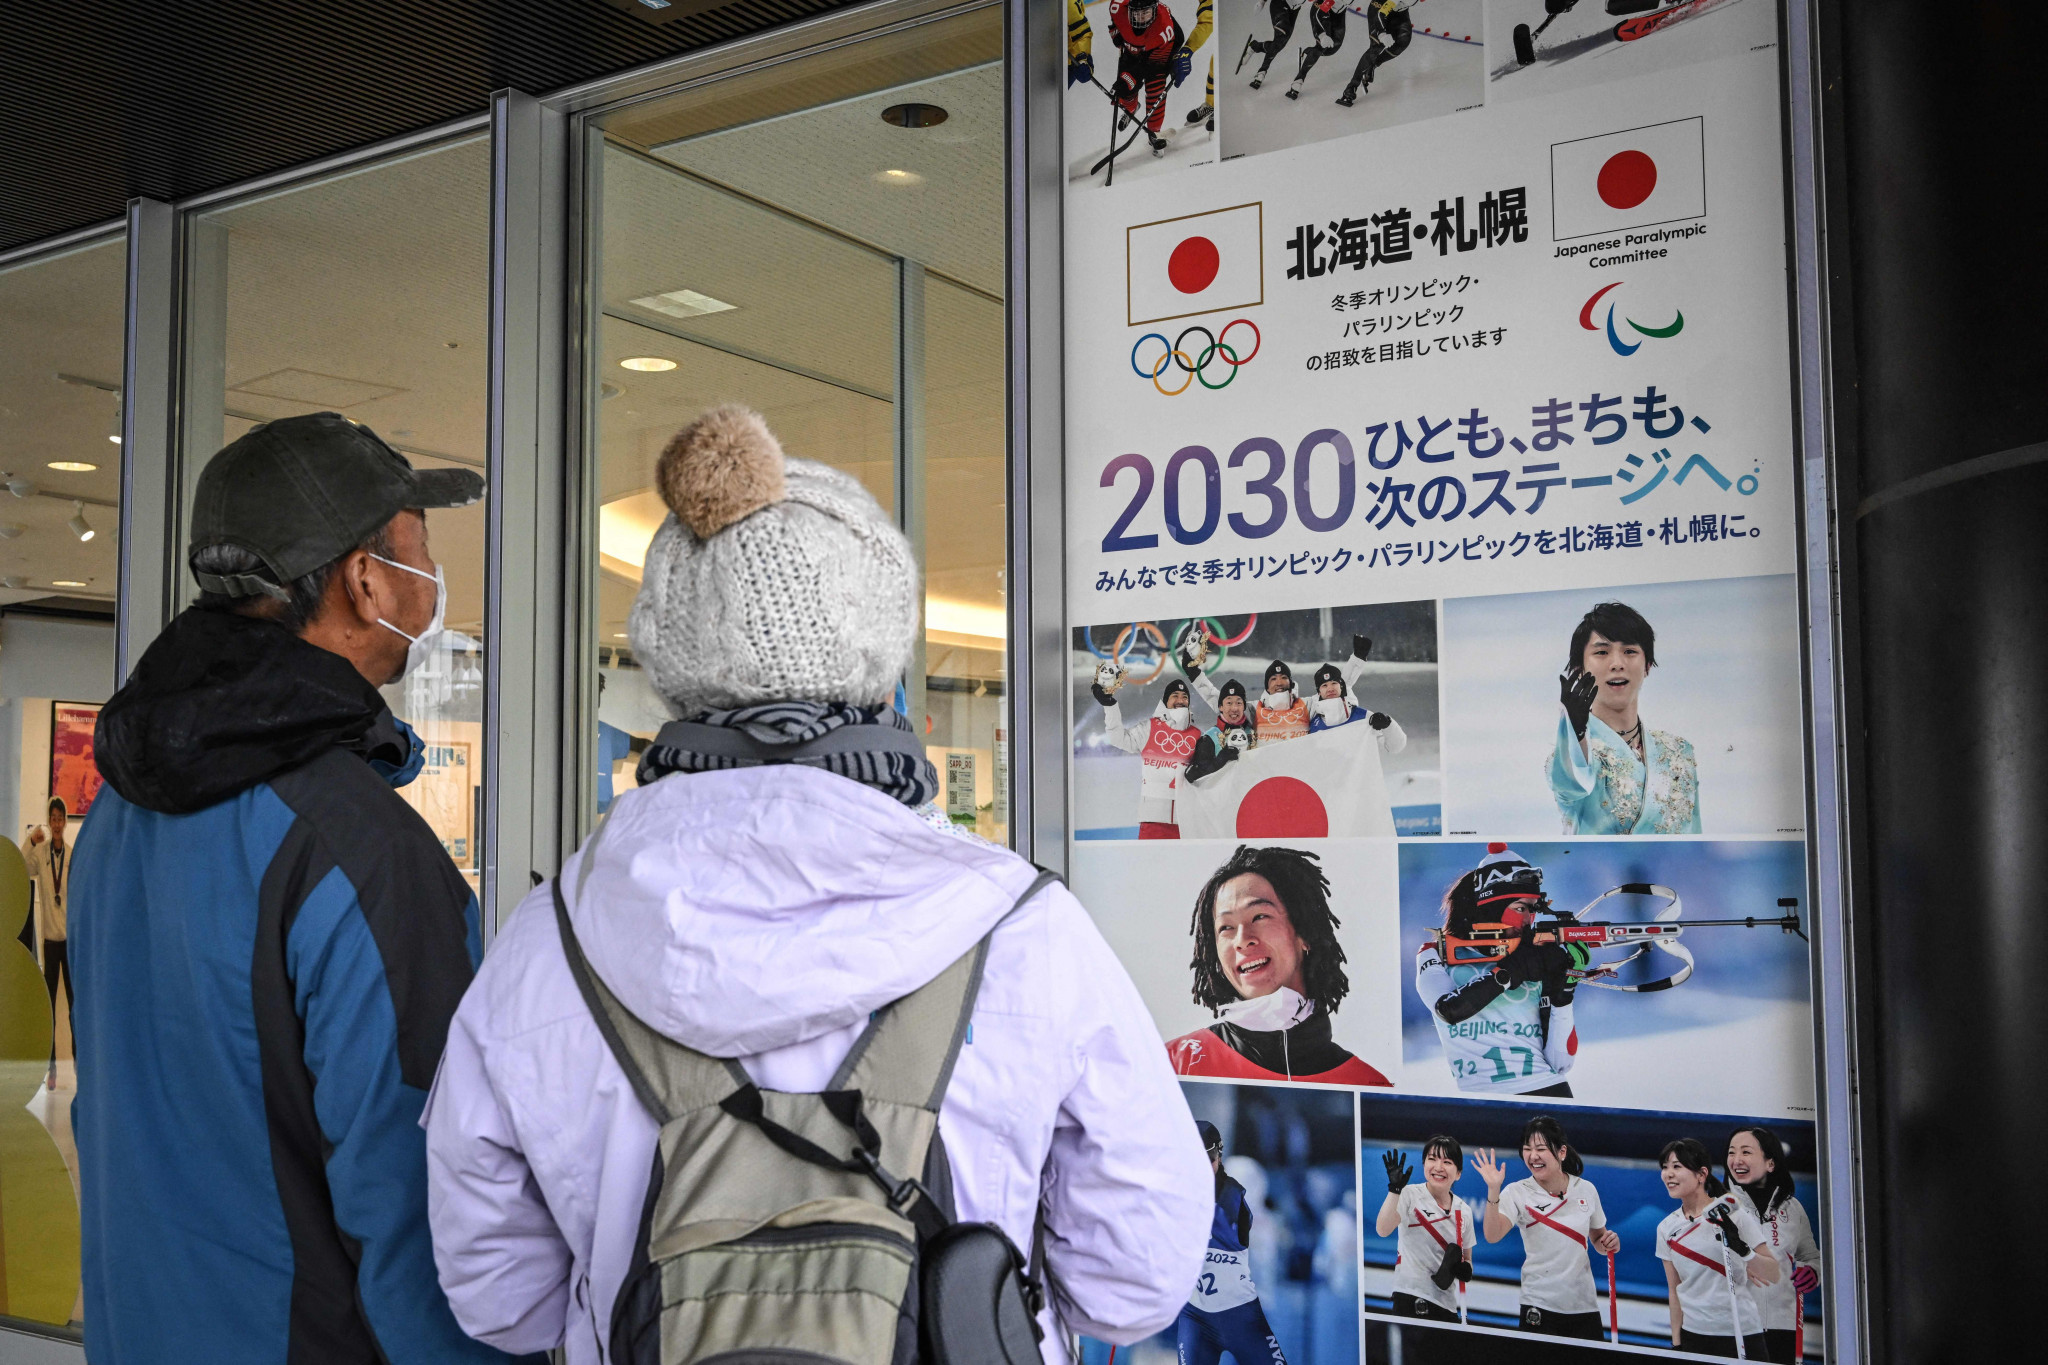 Sapporo to ditch 2030 Winter Olympics and Paralympics bid 